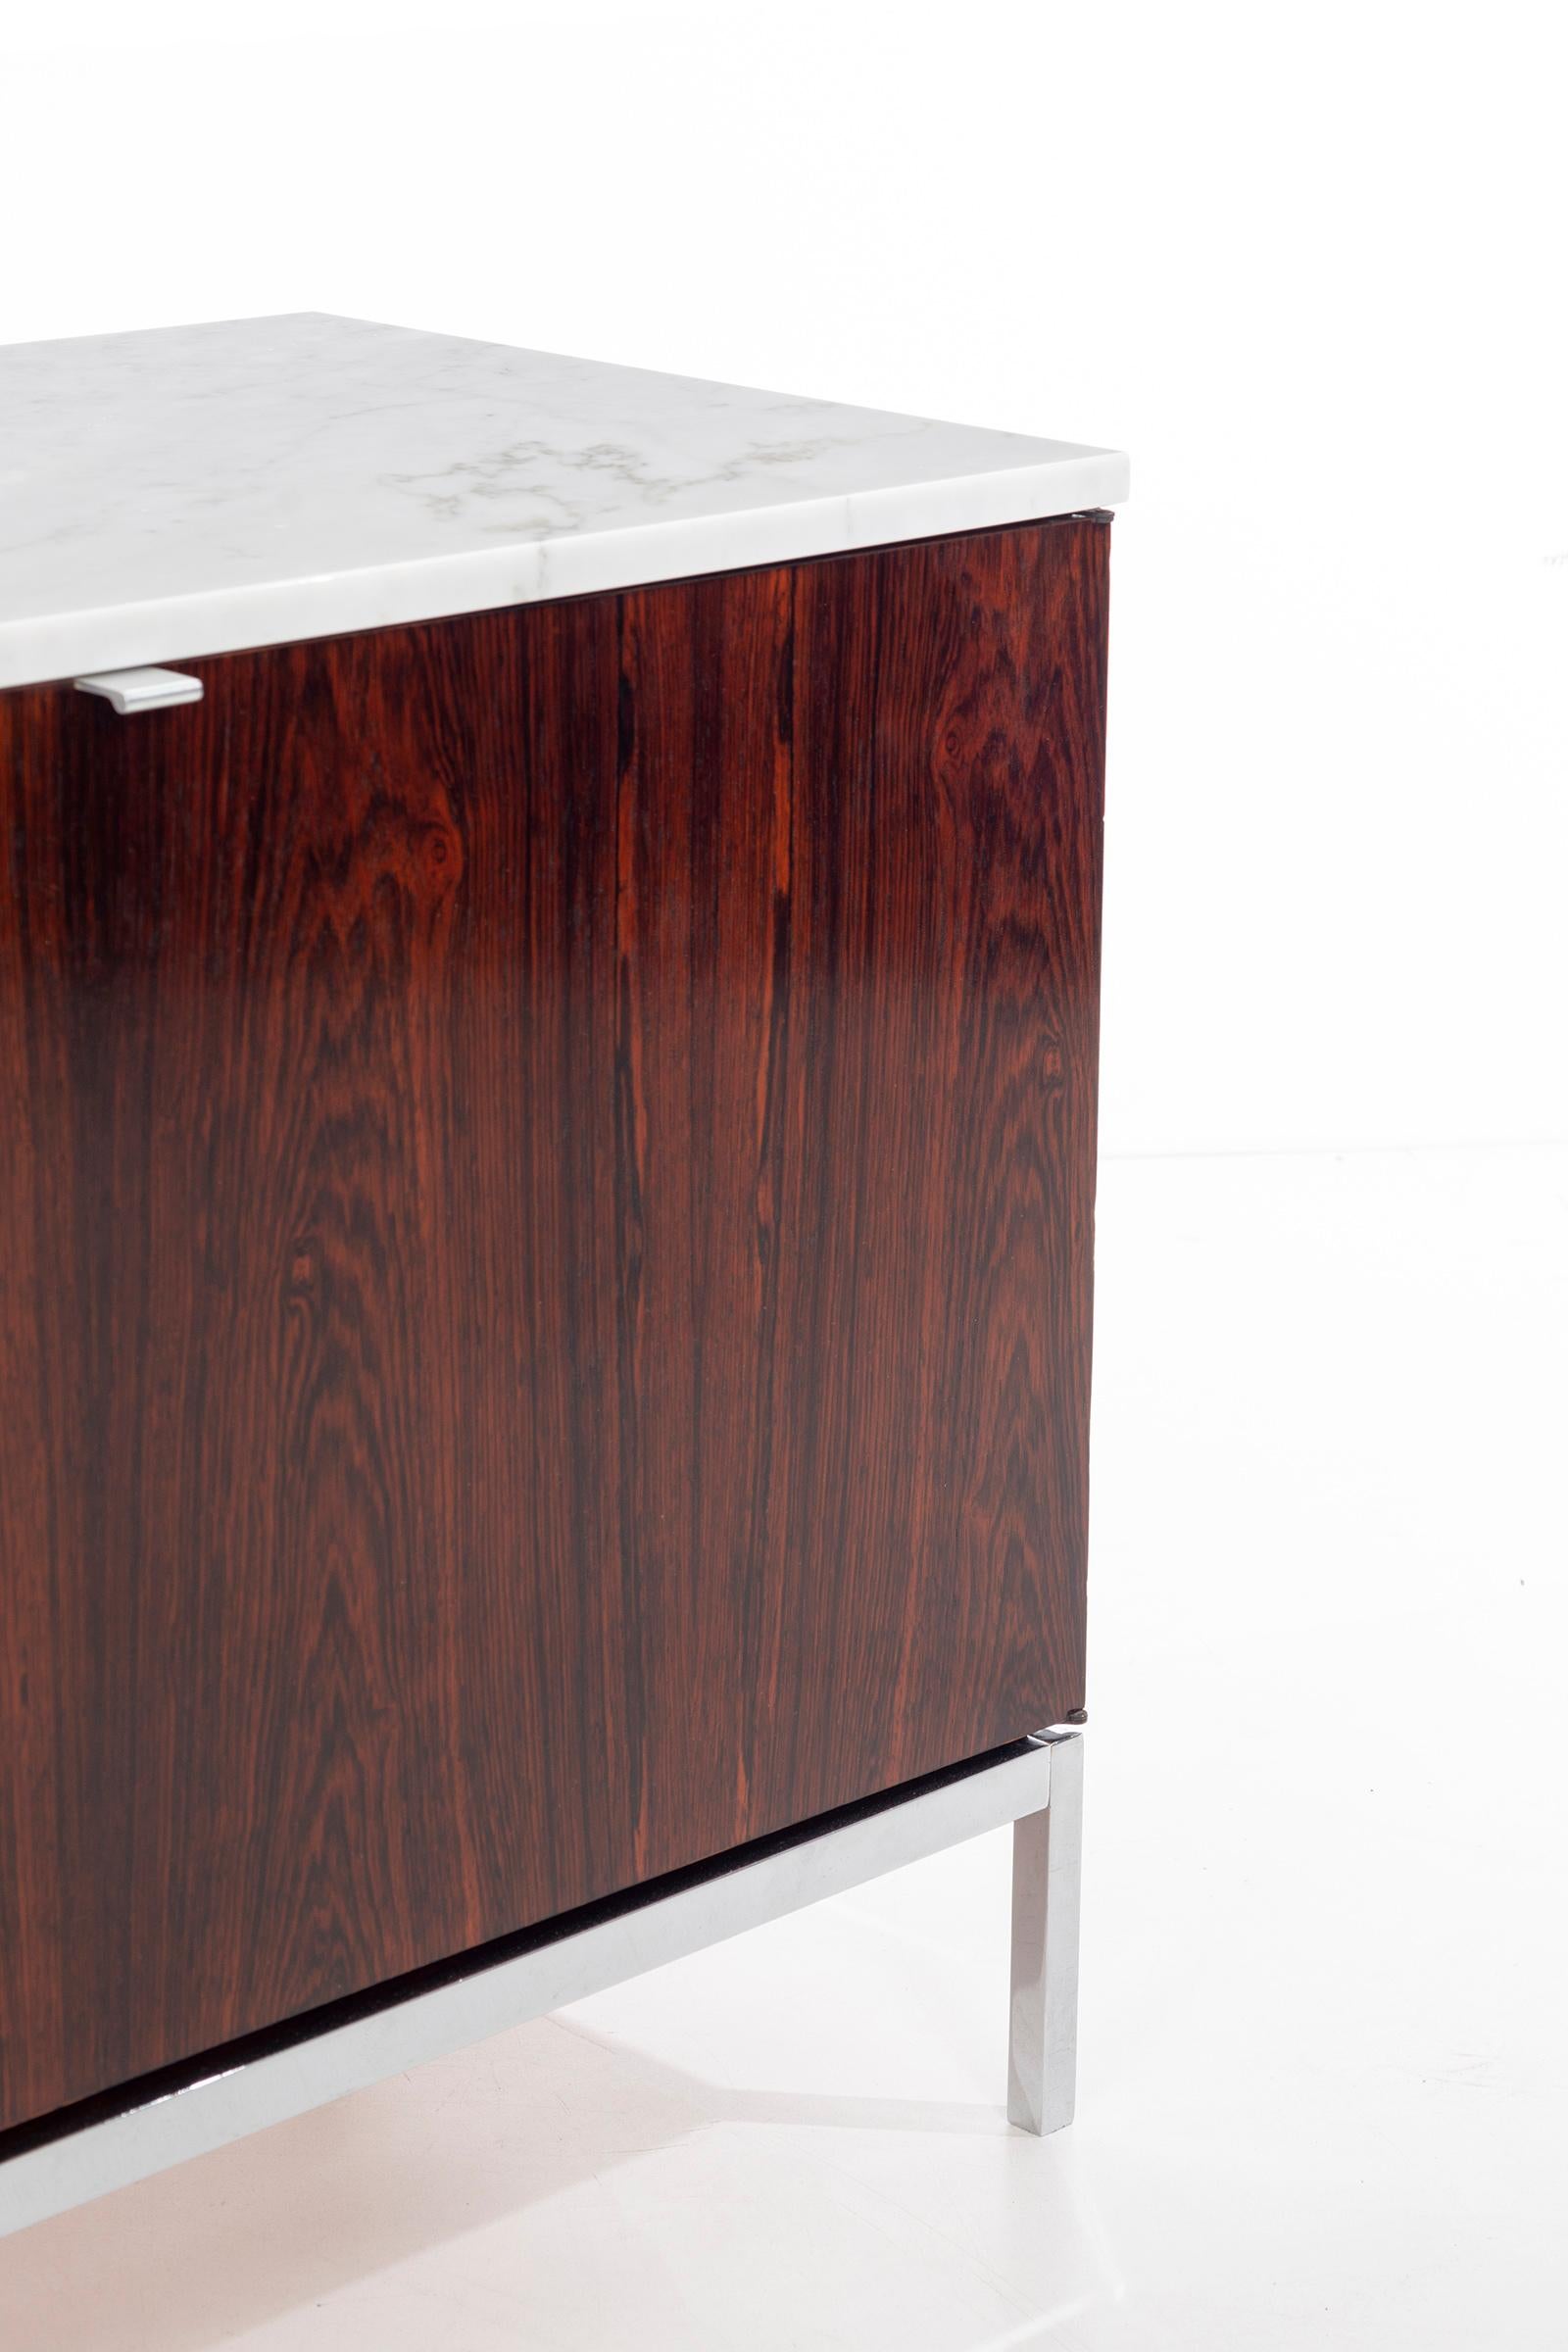 Monumental Custom Florence Knoll Rosewood Credenza 4